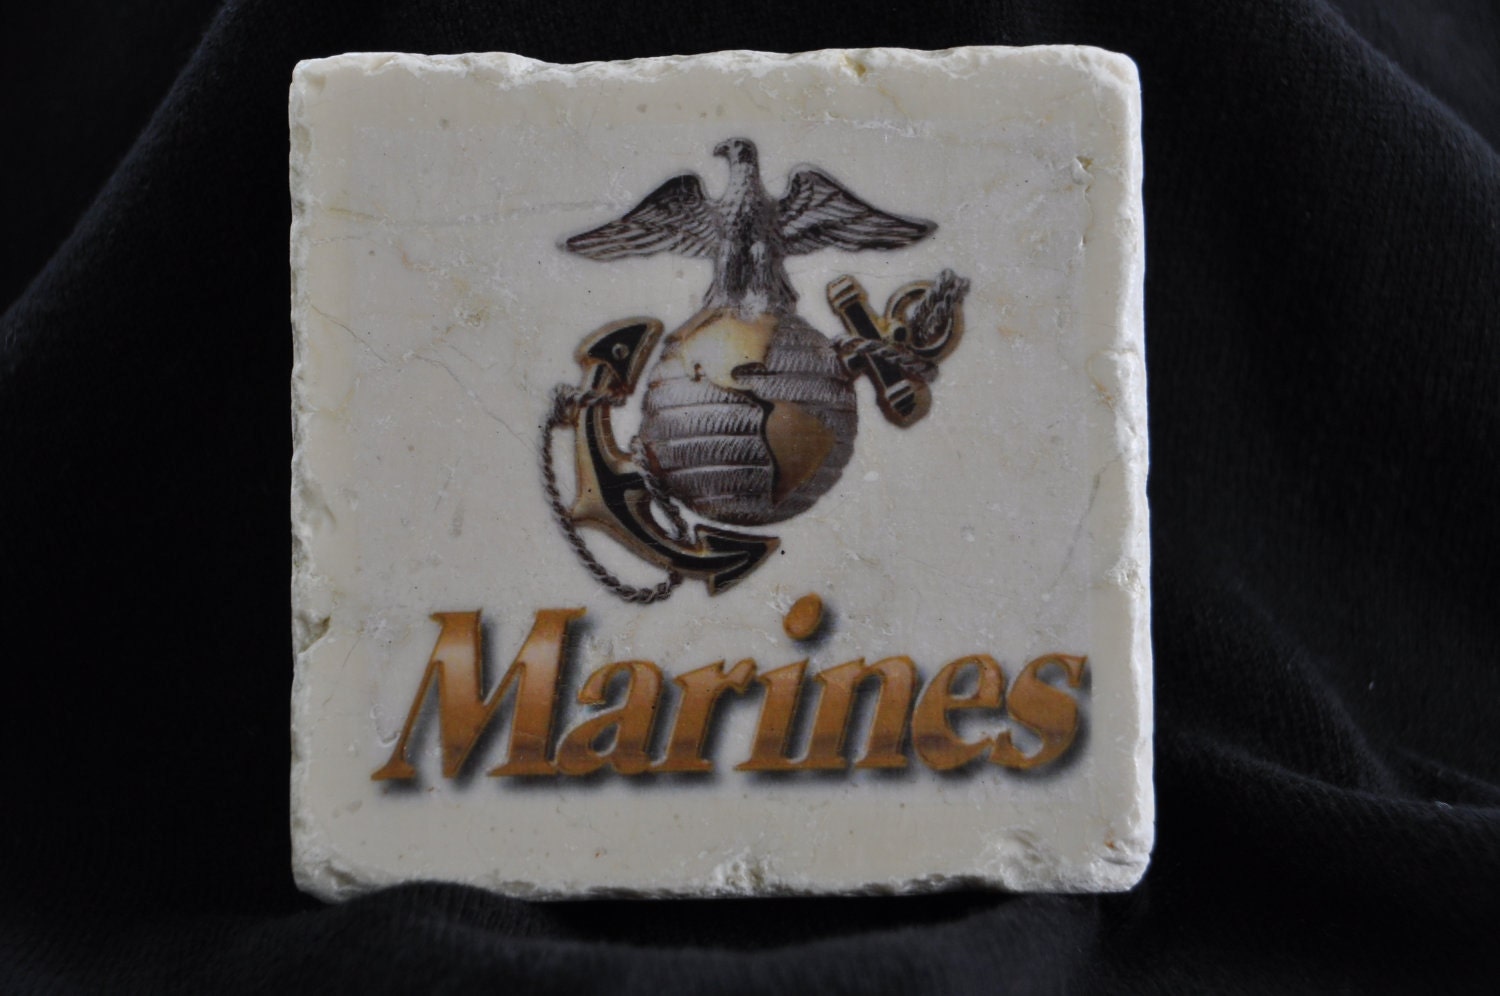 United States Marines Coasters Set of 4 Handcrafted